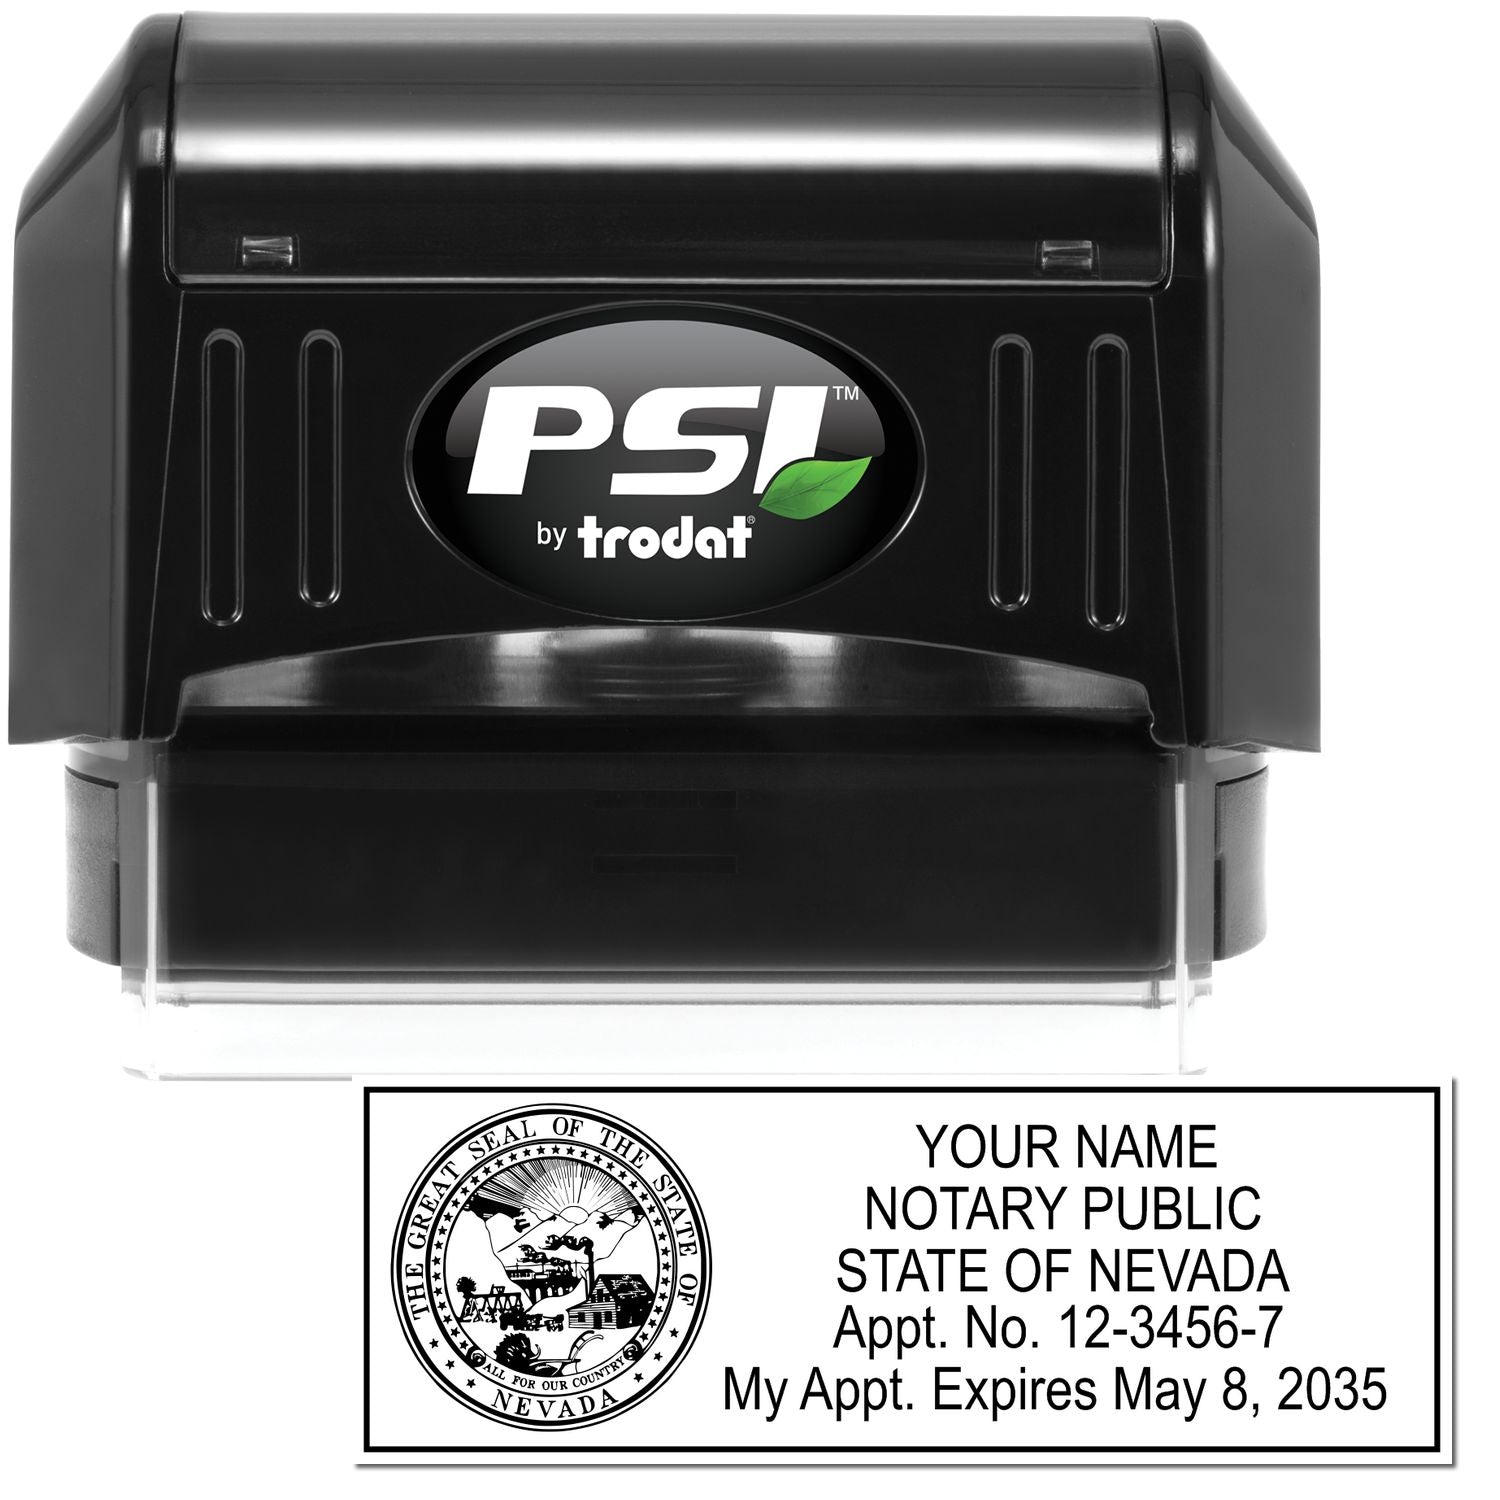 The main image for the PSI Nevada Notary Stamp depicting a sample of the imprint and electronic files